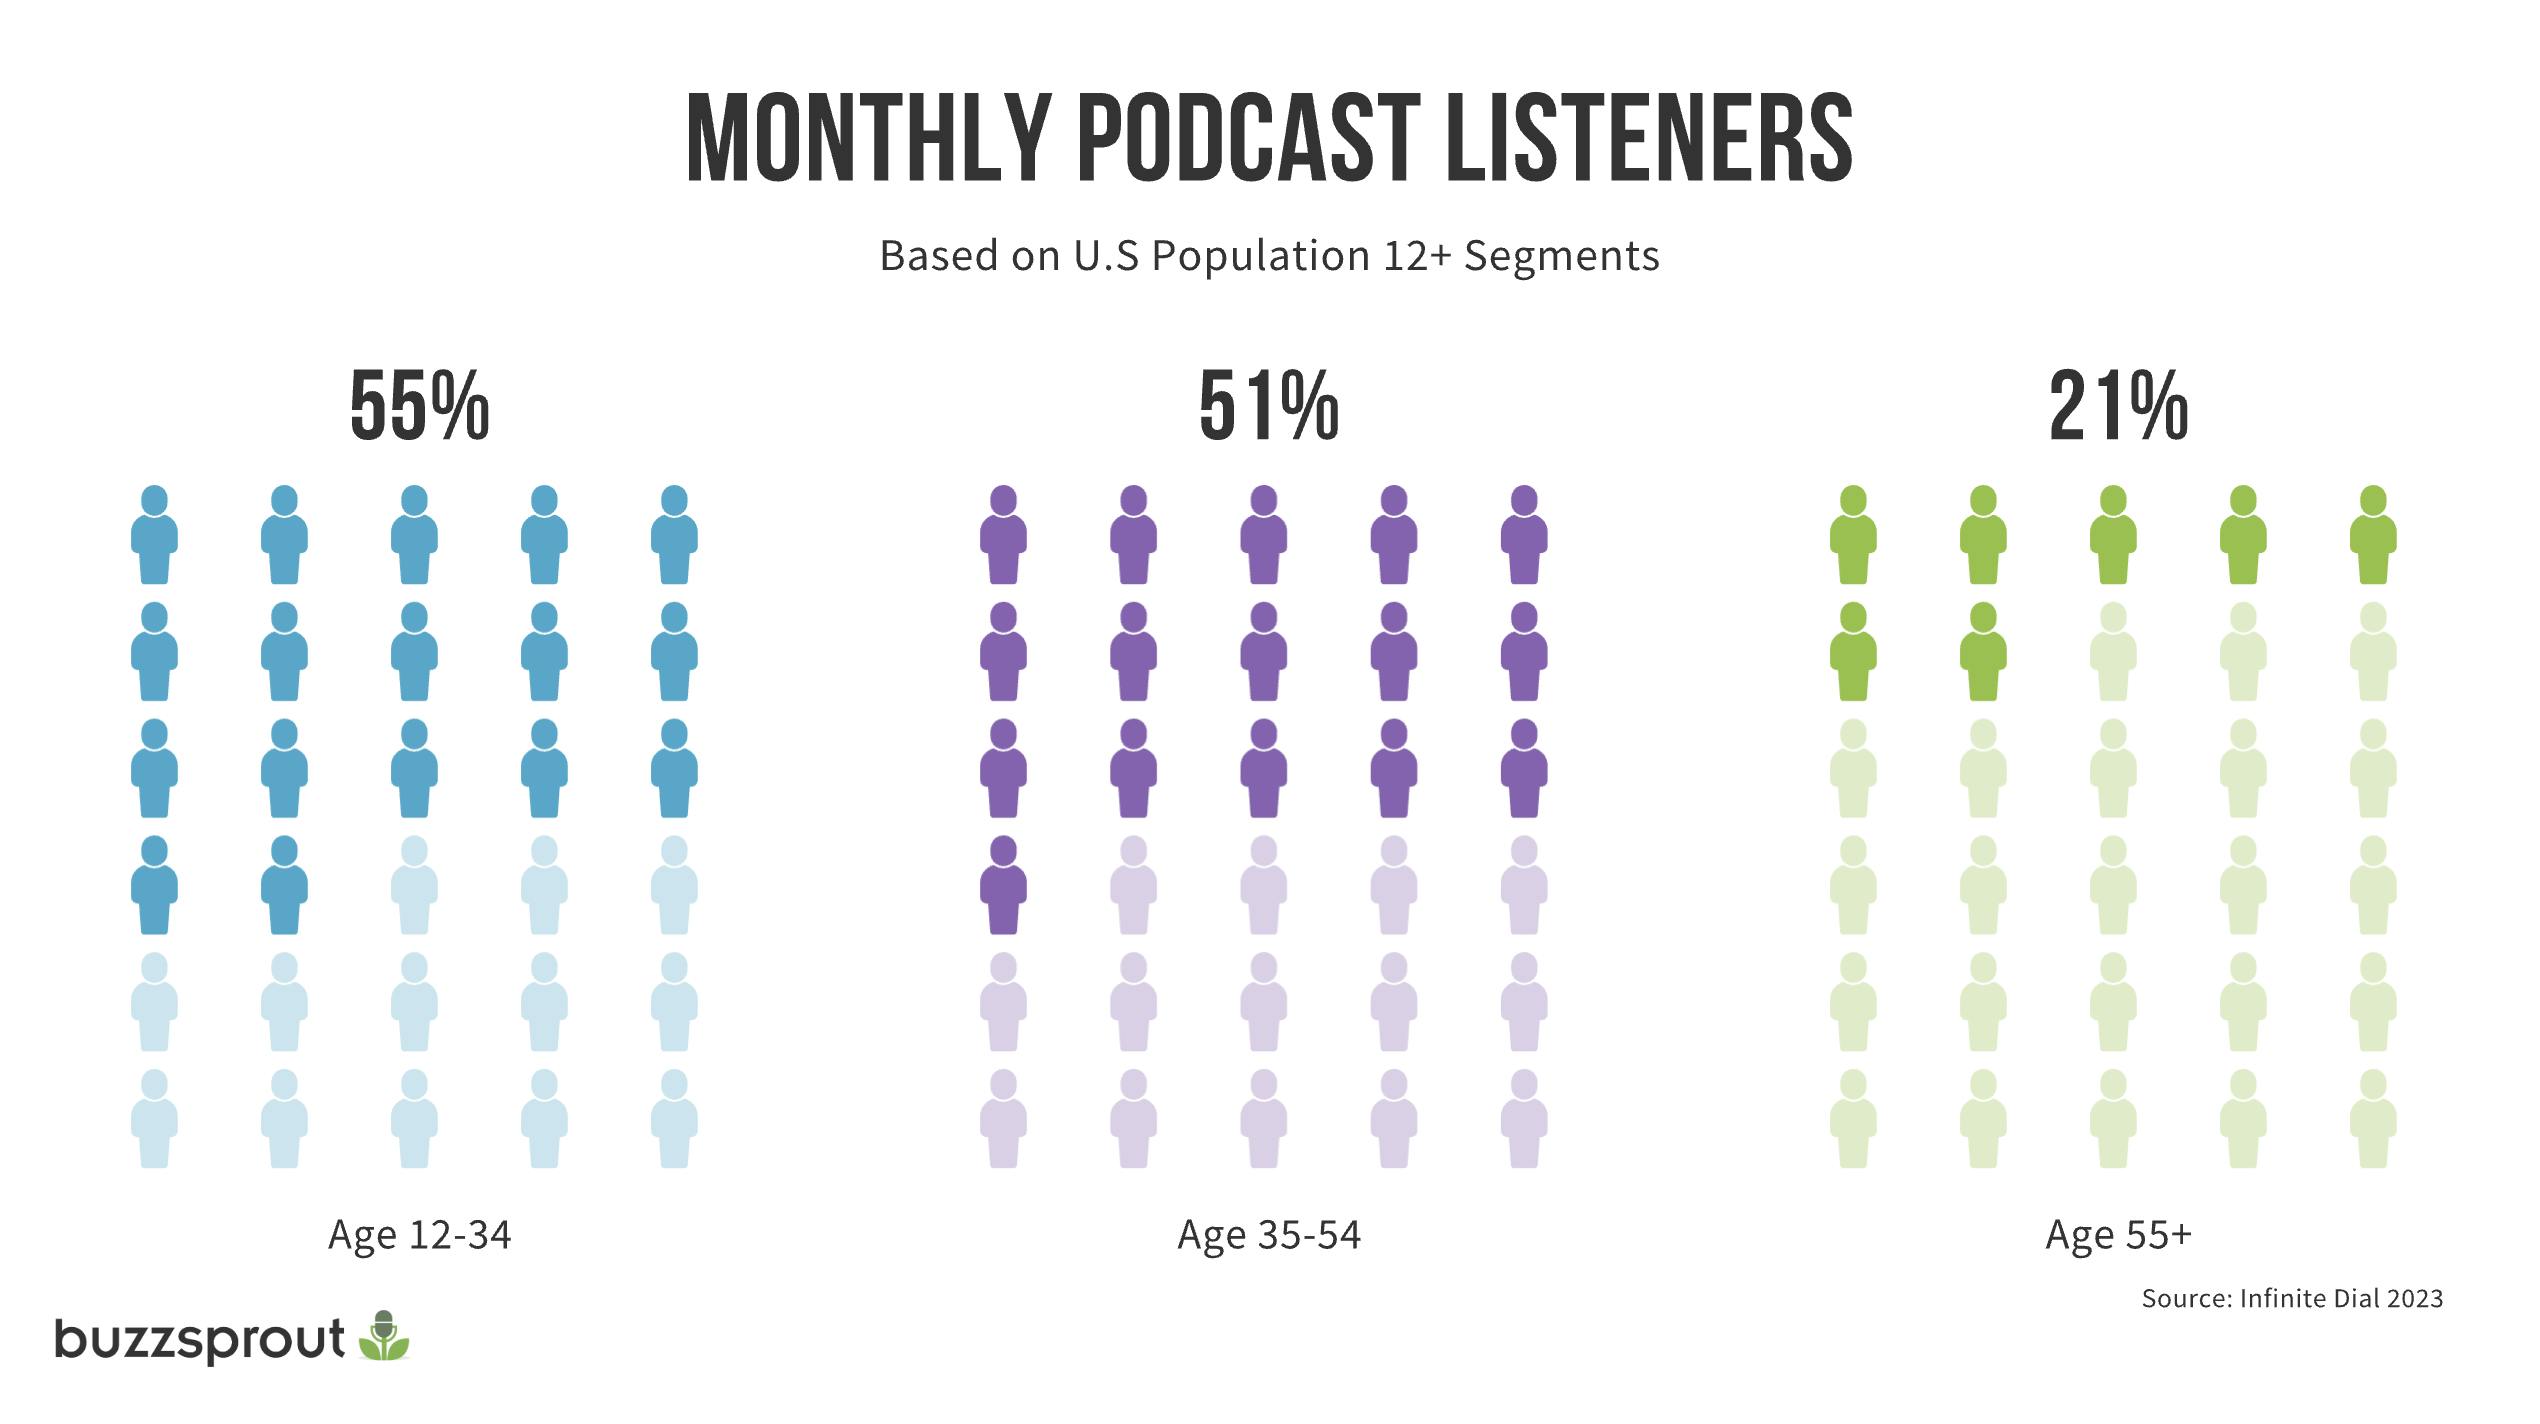 Key facts about the US radio industry and its listeners for